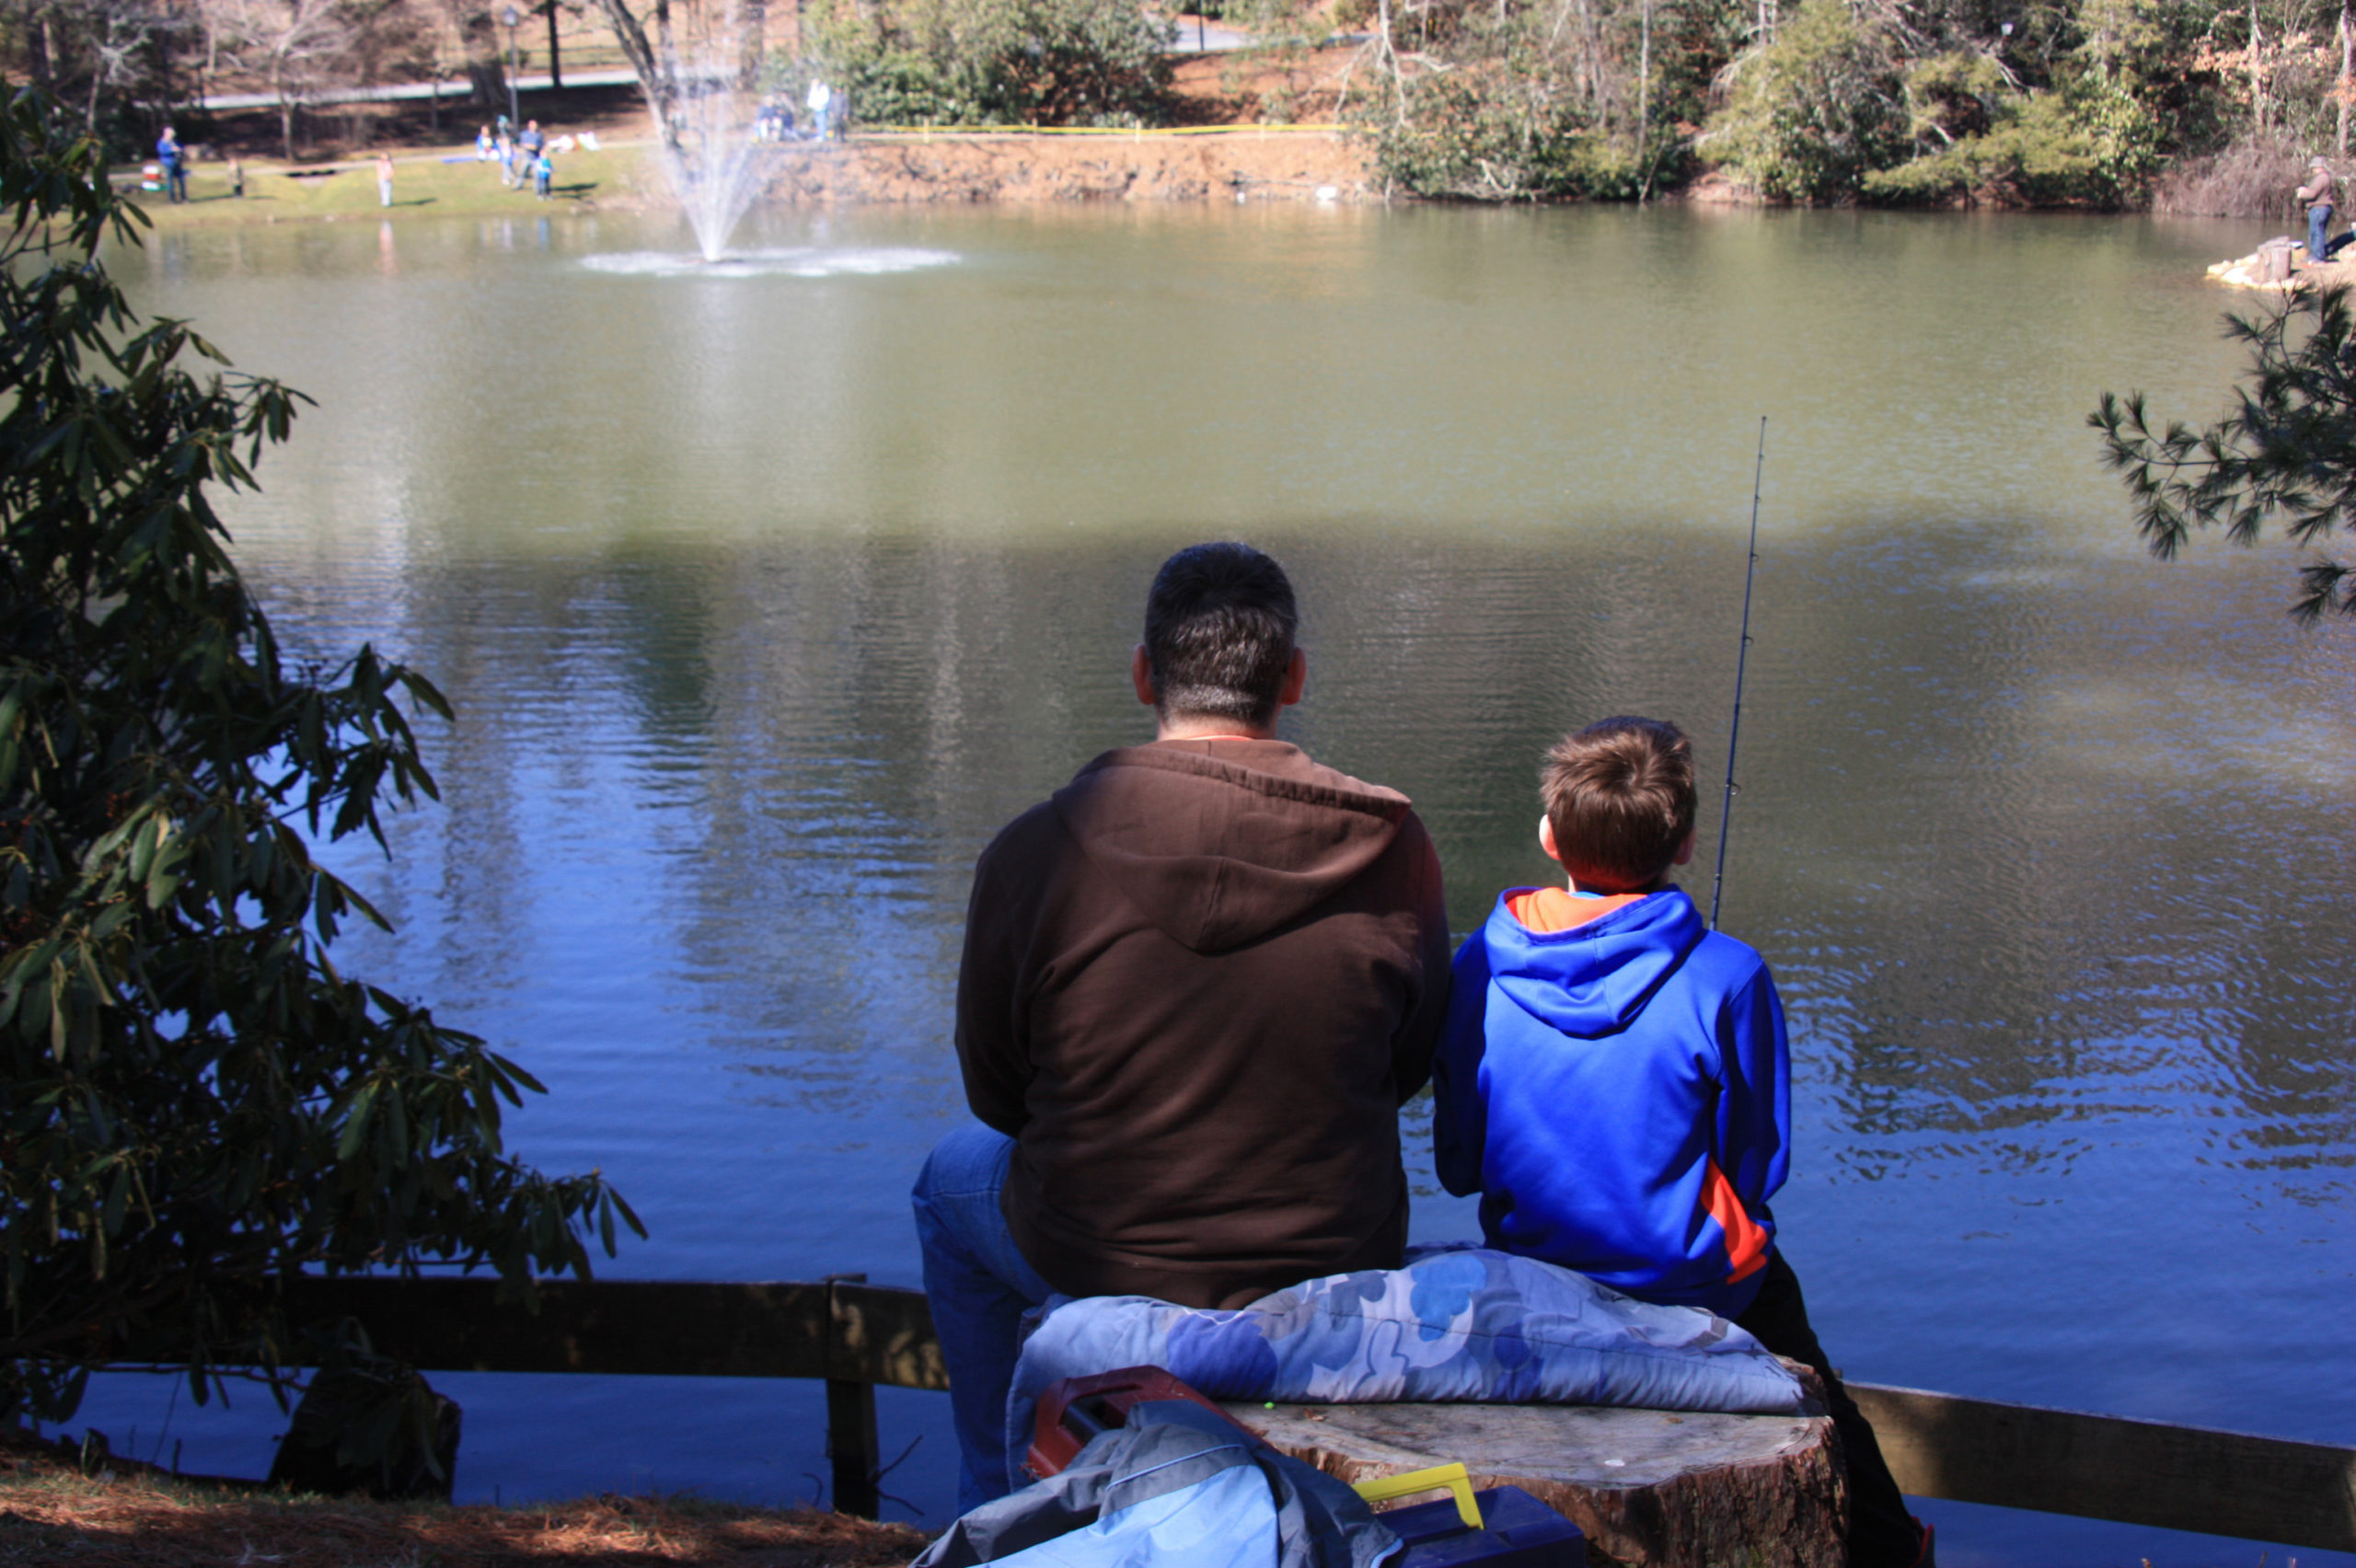 A father a son sit next to each other with their backs to the camera, facing a pond with a fountain. The boy is holding a fishing pole.